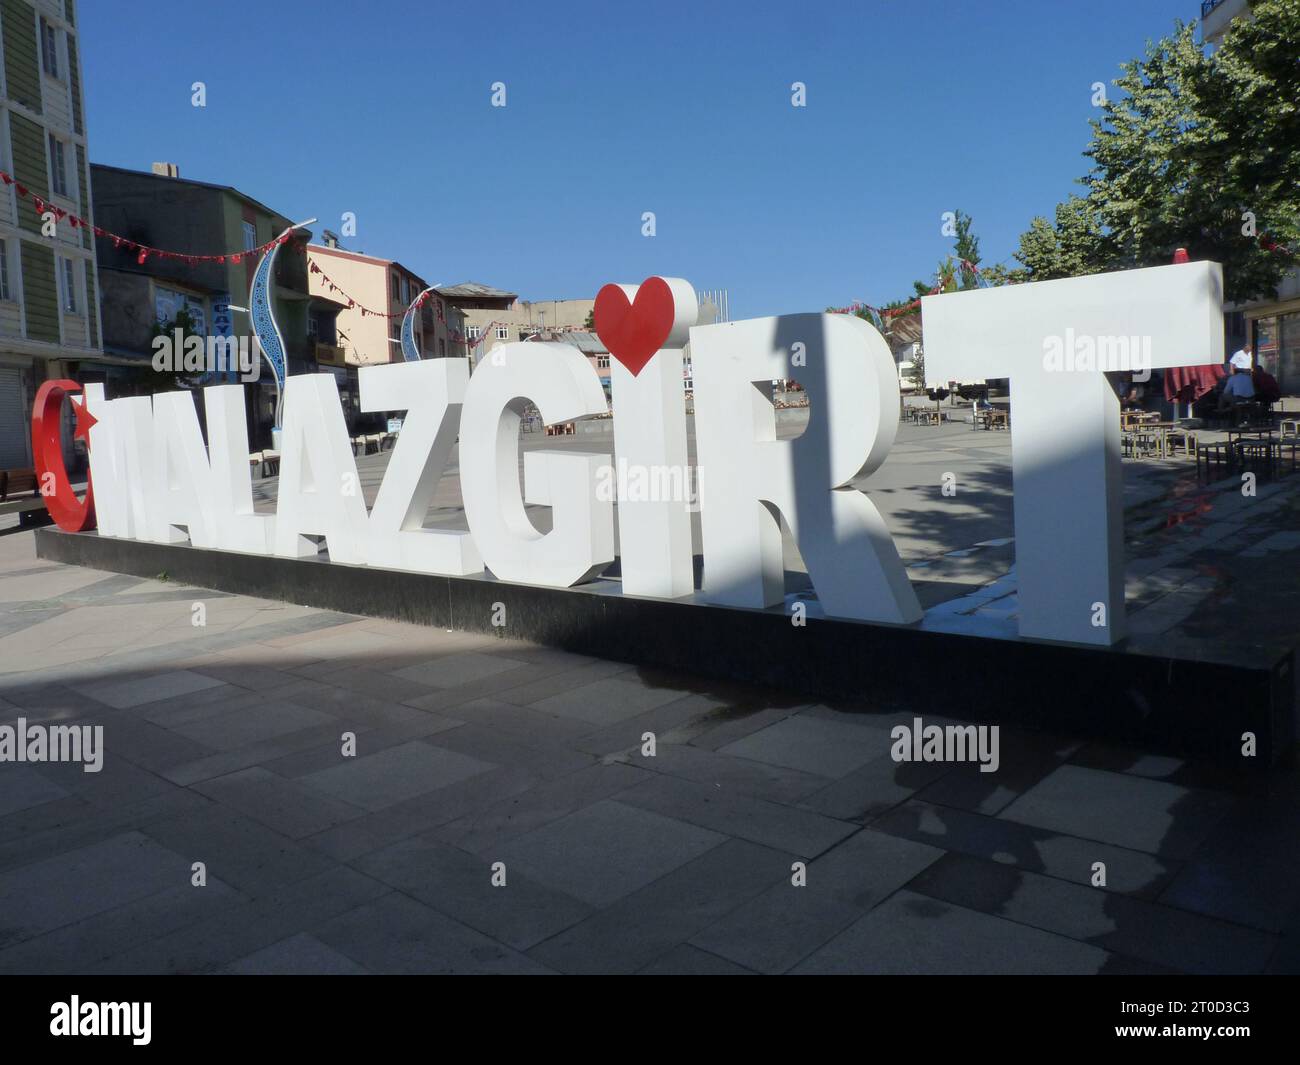 Malazgirt, Mus, Turkey, July 3, 2019: Large letters placed in a square forming the name of the city of Malazgirt in Turkey Stock Photo